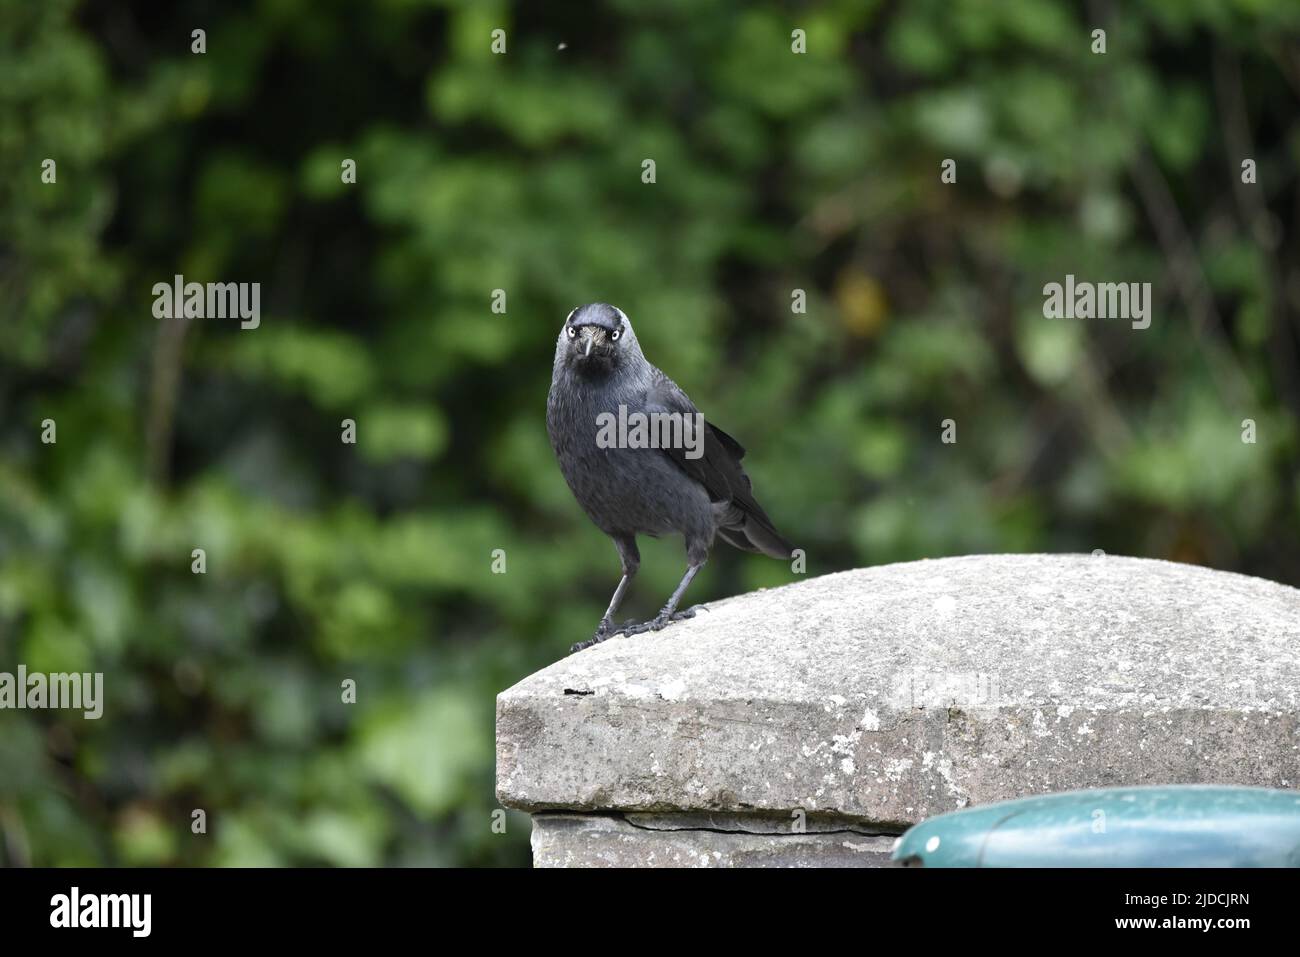 Close-Up Image of a Western Jackdaw (Corvus monedula) Facing Camera in Middle of Image, Against a Blurred Green Leafy Background, on the Isle of Man Stock Photo